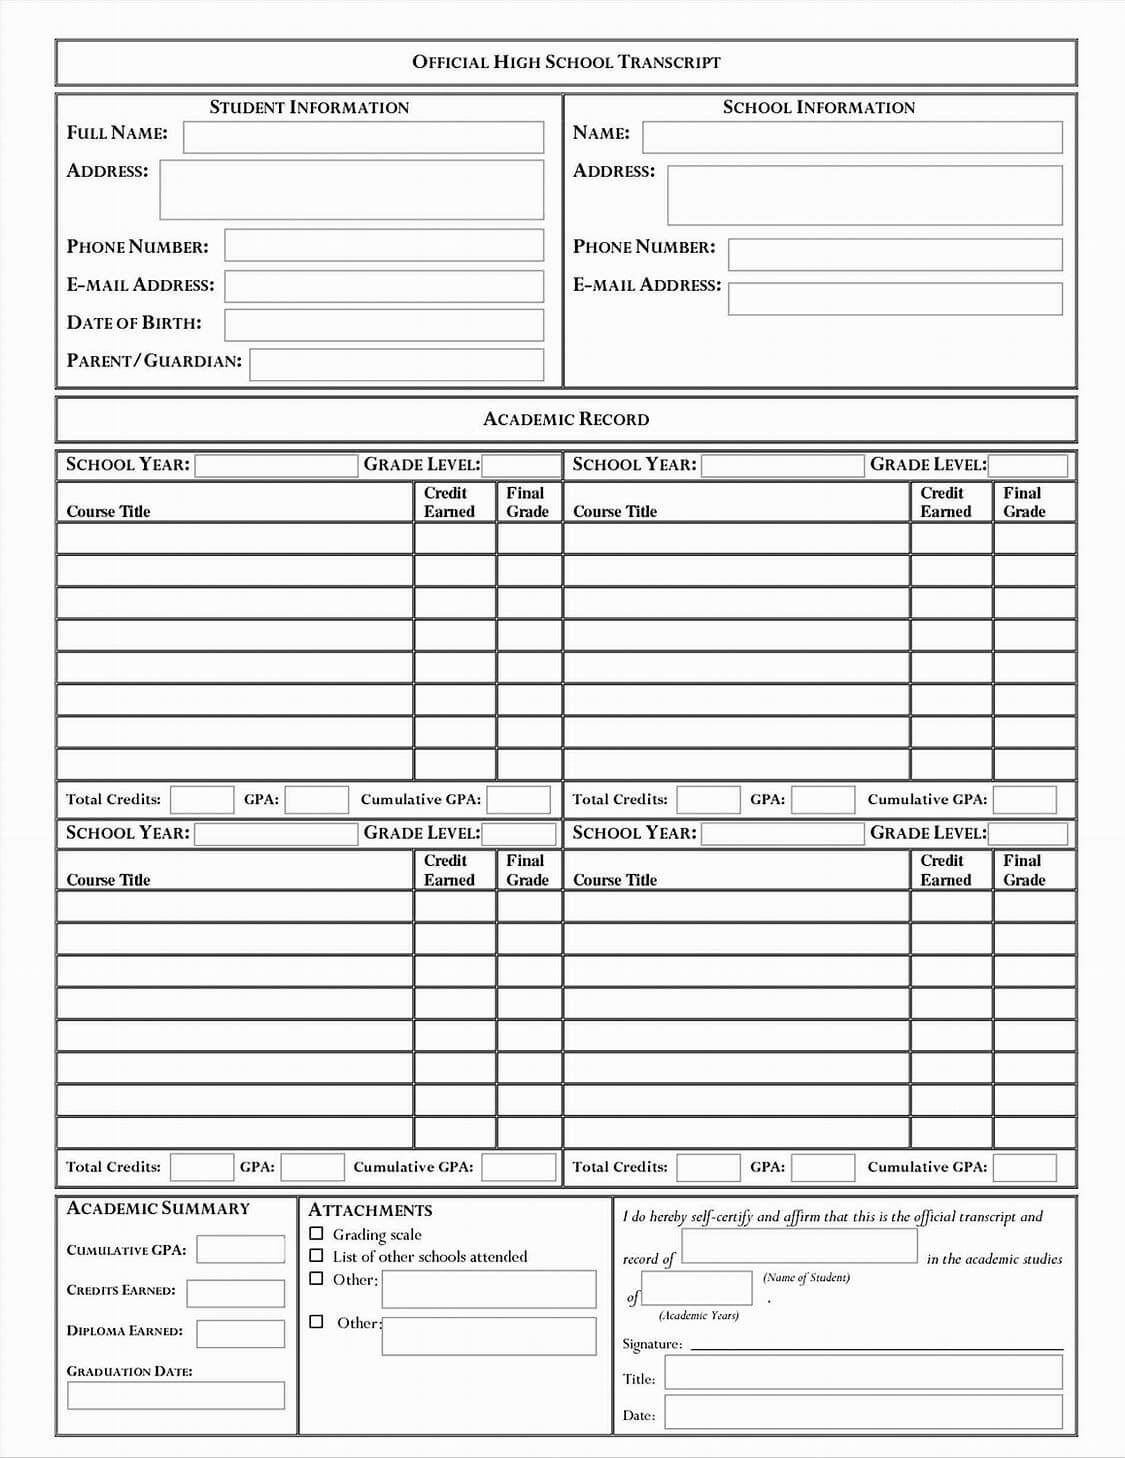 Image Result For Middle School Transcript Template | School Intended For High School Report Card Template